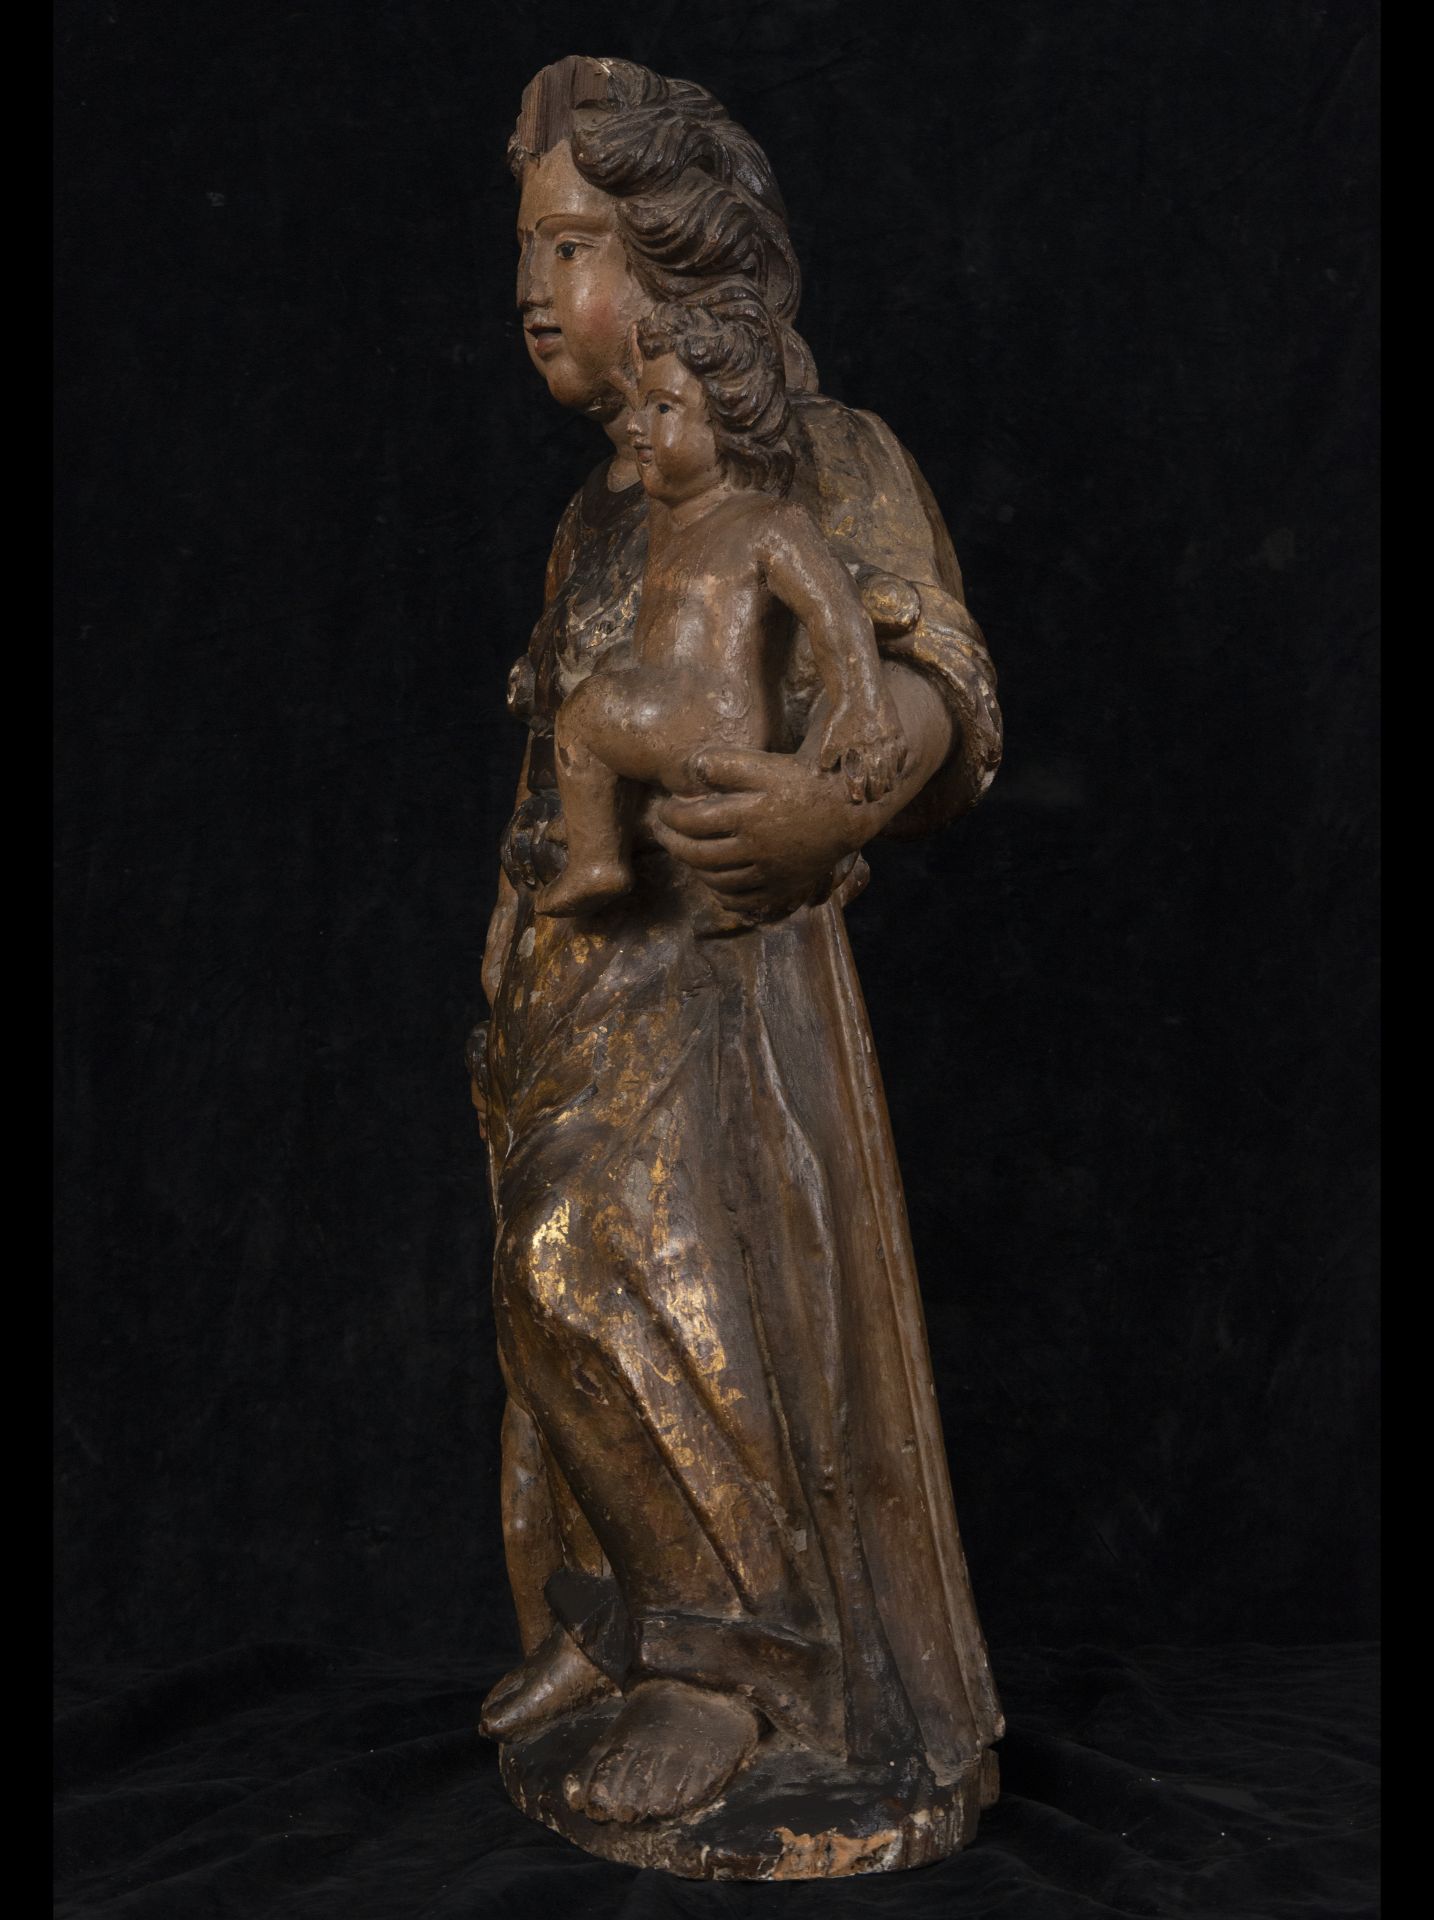 17th century Portuguese Virgin with Child in her arms, 17th century - Image 5 of 10